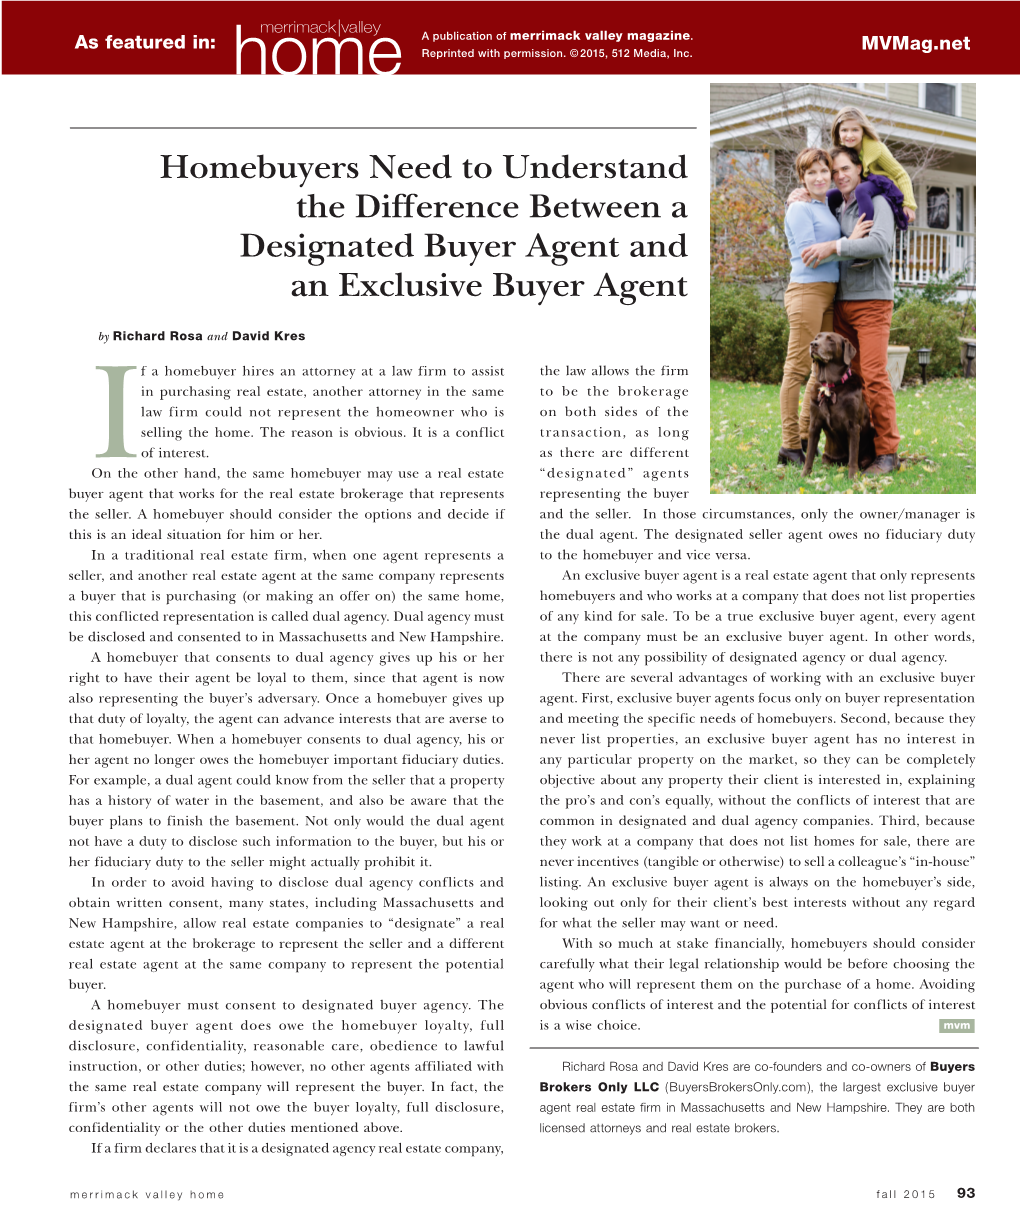 Homebuyers Need to Understand the Difference Between a Designated Buyer Agent and an Exclusive Buyer Agent